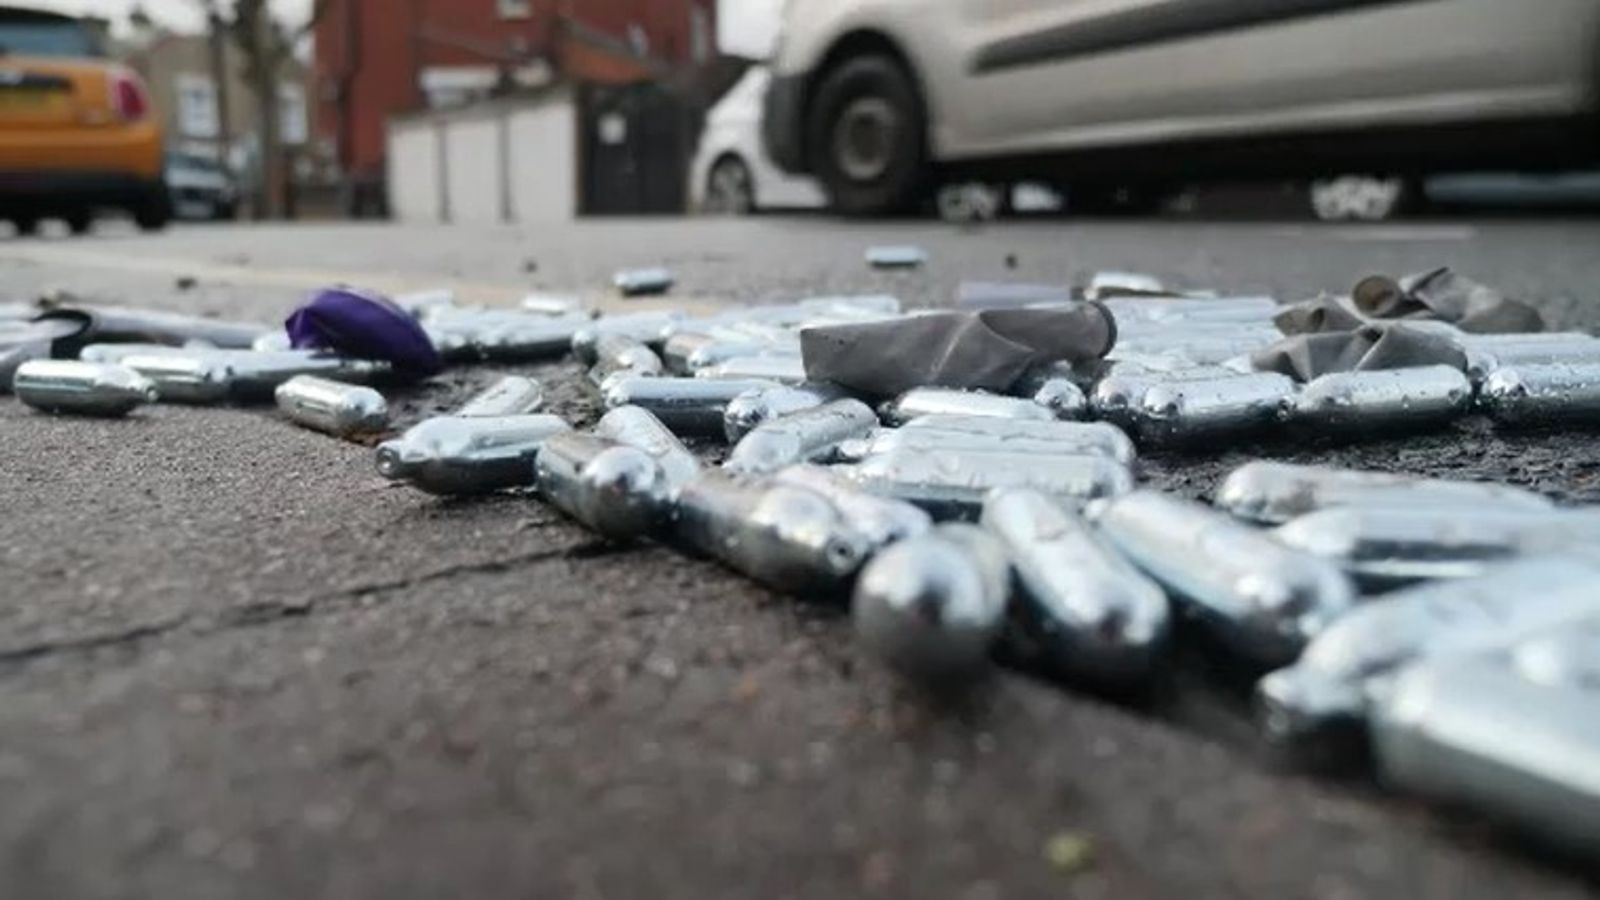 Nitrous oxide to be banned under plans to clamp down on anti-social behaviour